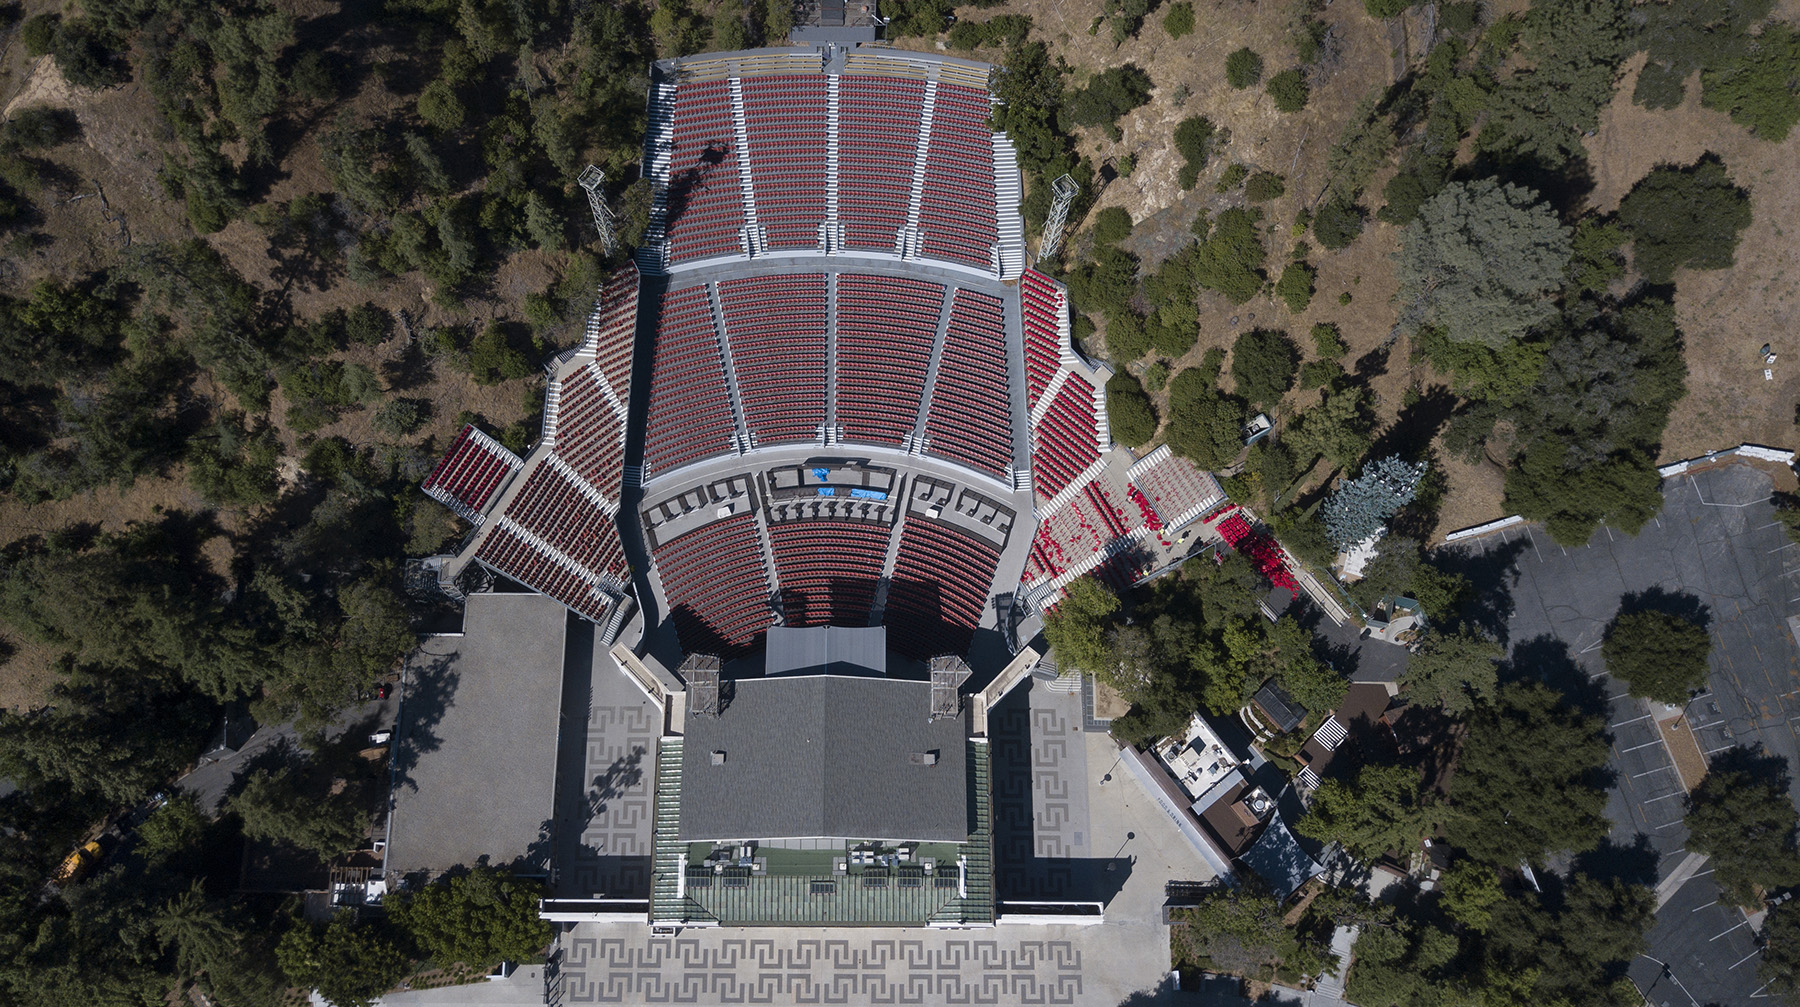 aerial photo of outdoor theatre showing entrance, seating, patterned concrete walkway, and surrounding trees and hills